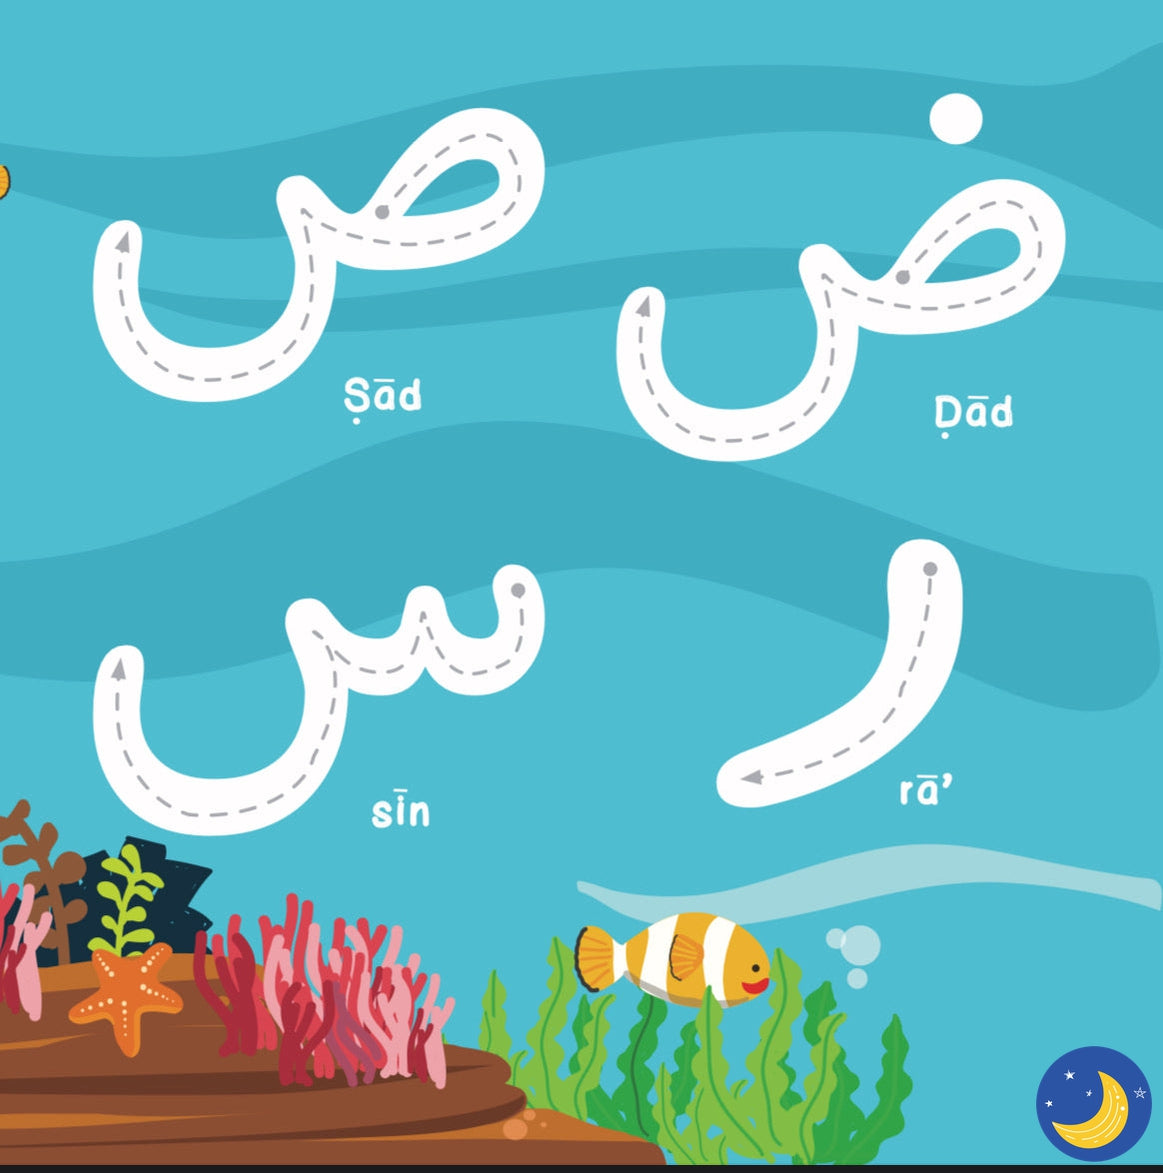 My First Quran Activity Book - My First Iqra! | Crescent Moon Store